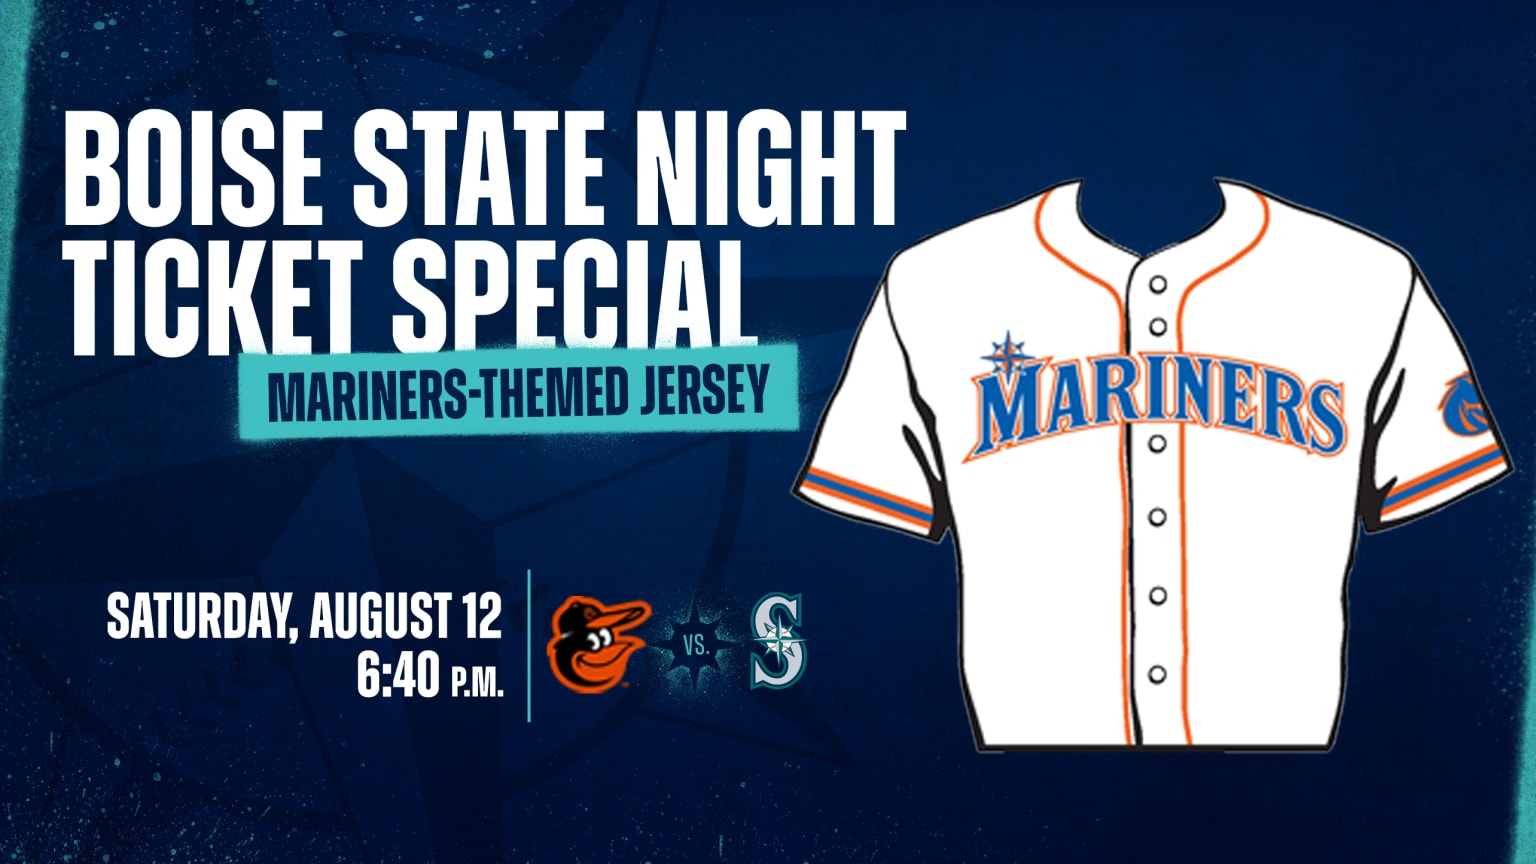 TYSON DEGENHART ON THROWING OUT MARINERS' FIRST PITCH - ON BOISE STATE NIGHT IN AUGUST